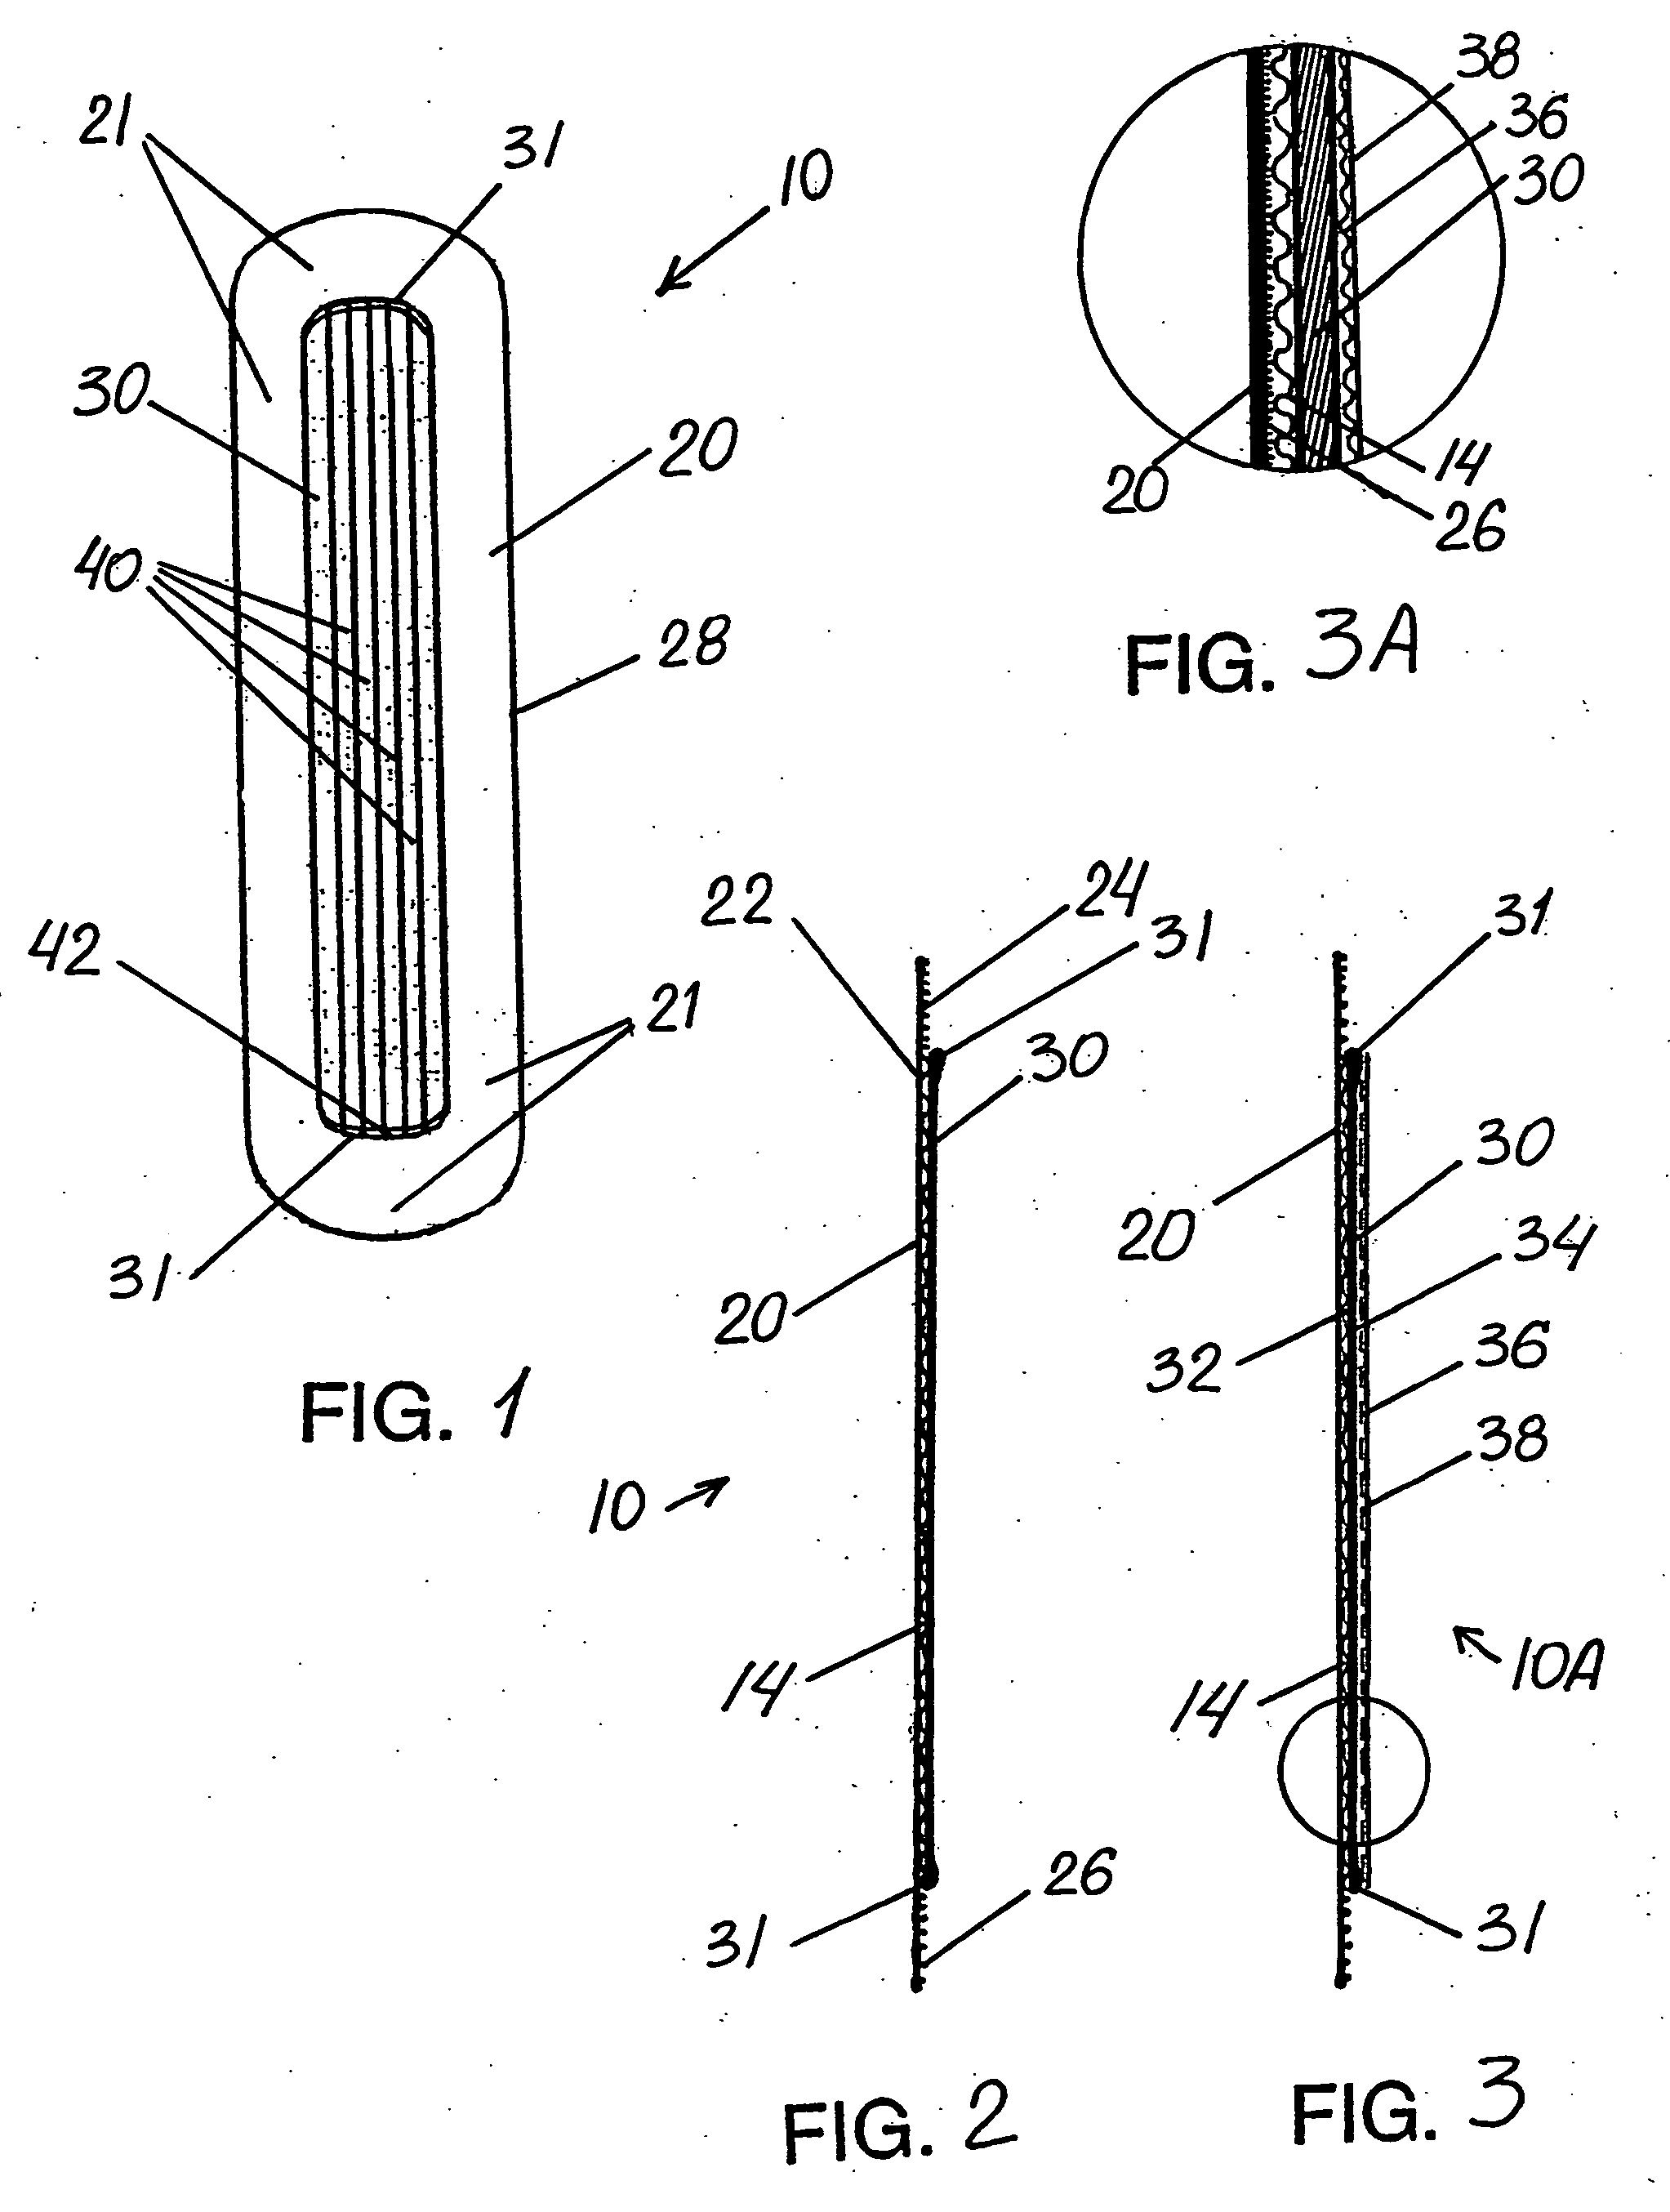 Anti-creep waist-clothing stay device and method of reinforcing crotch-adjacent inner-seam areas